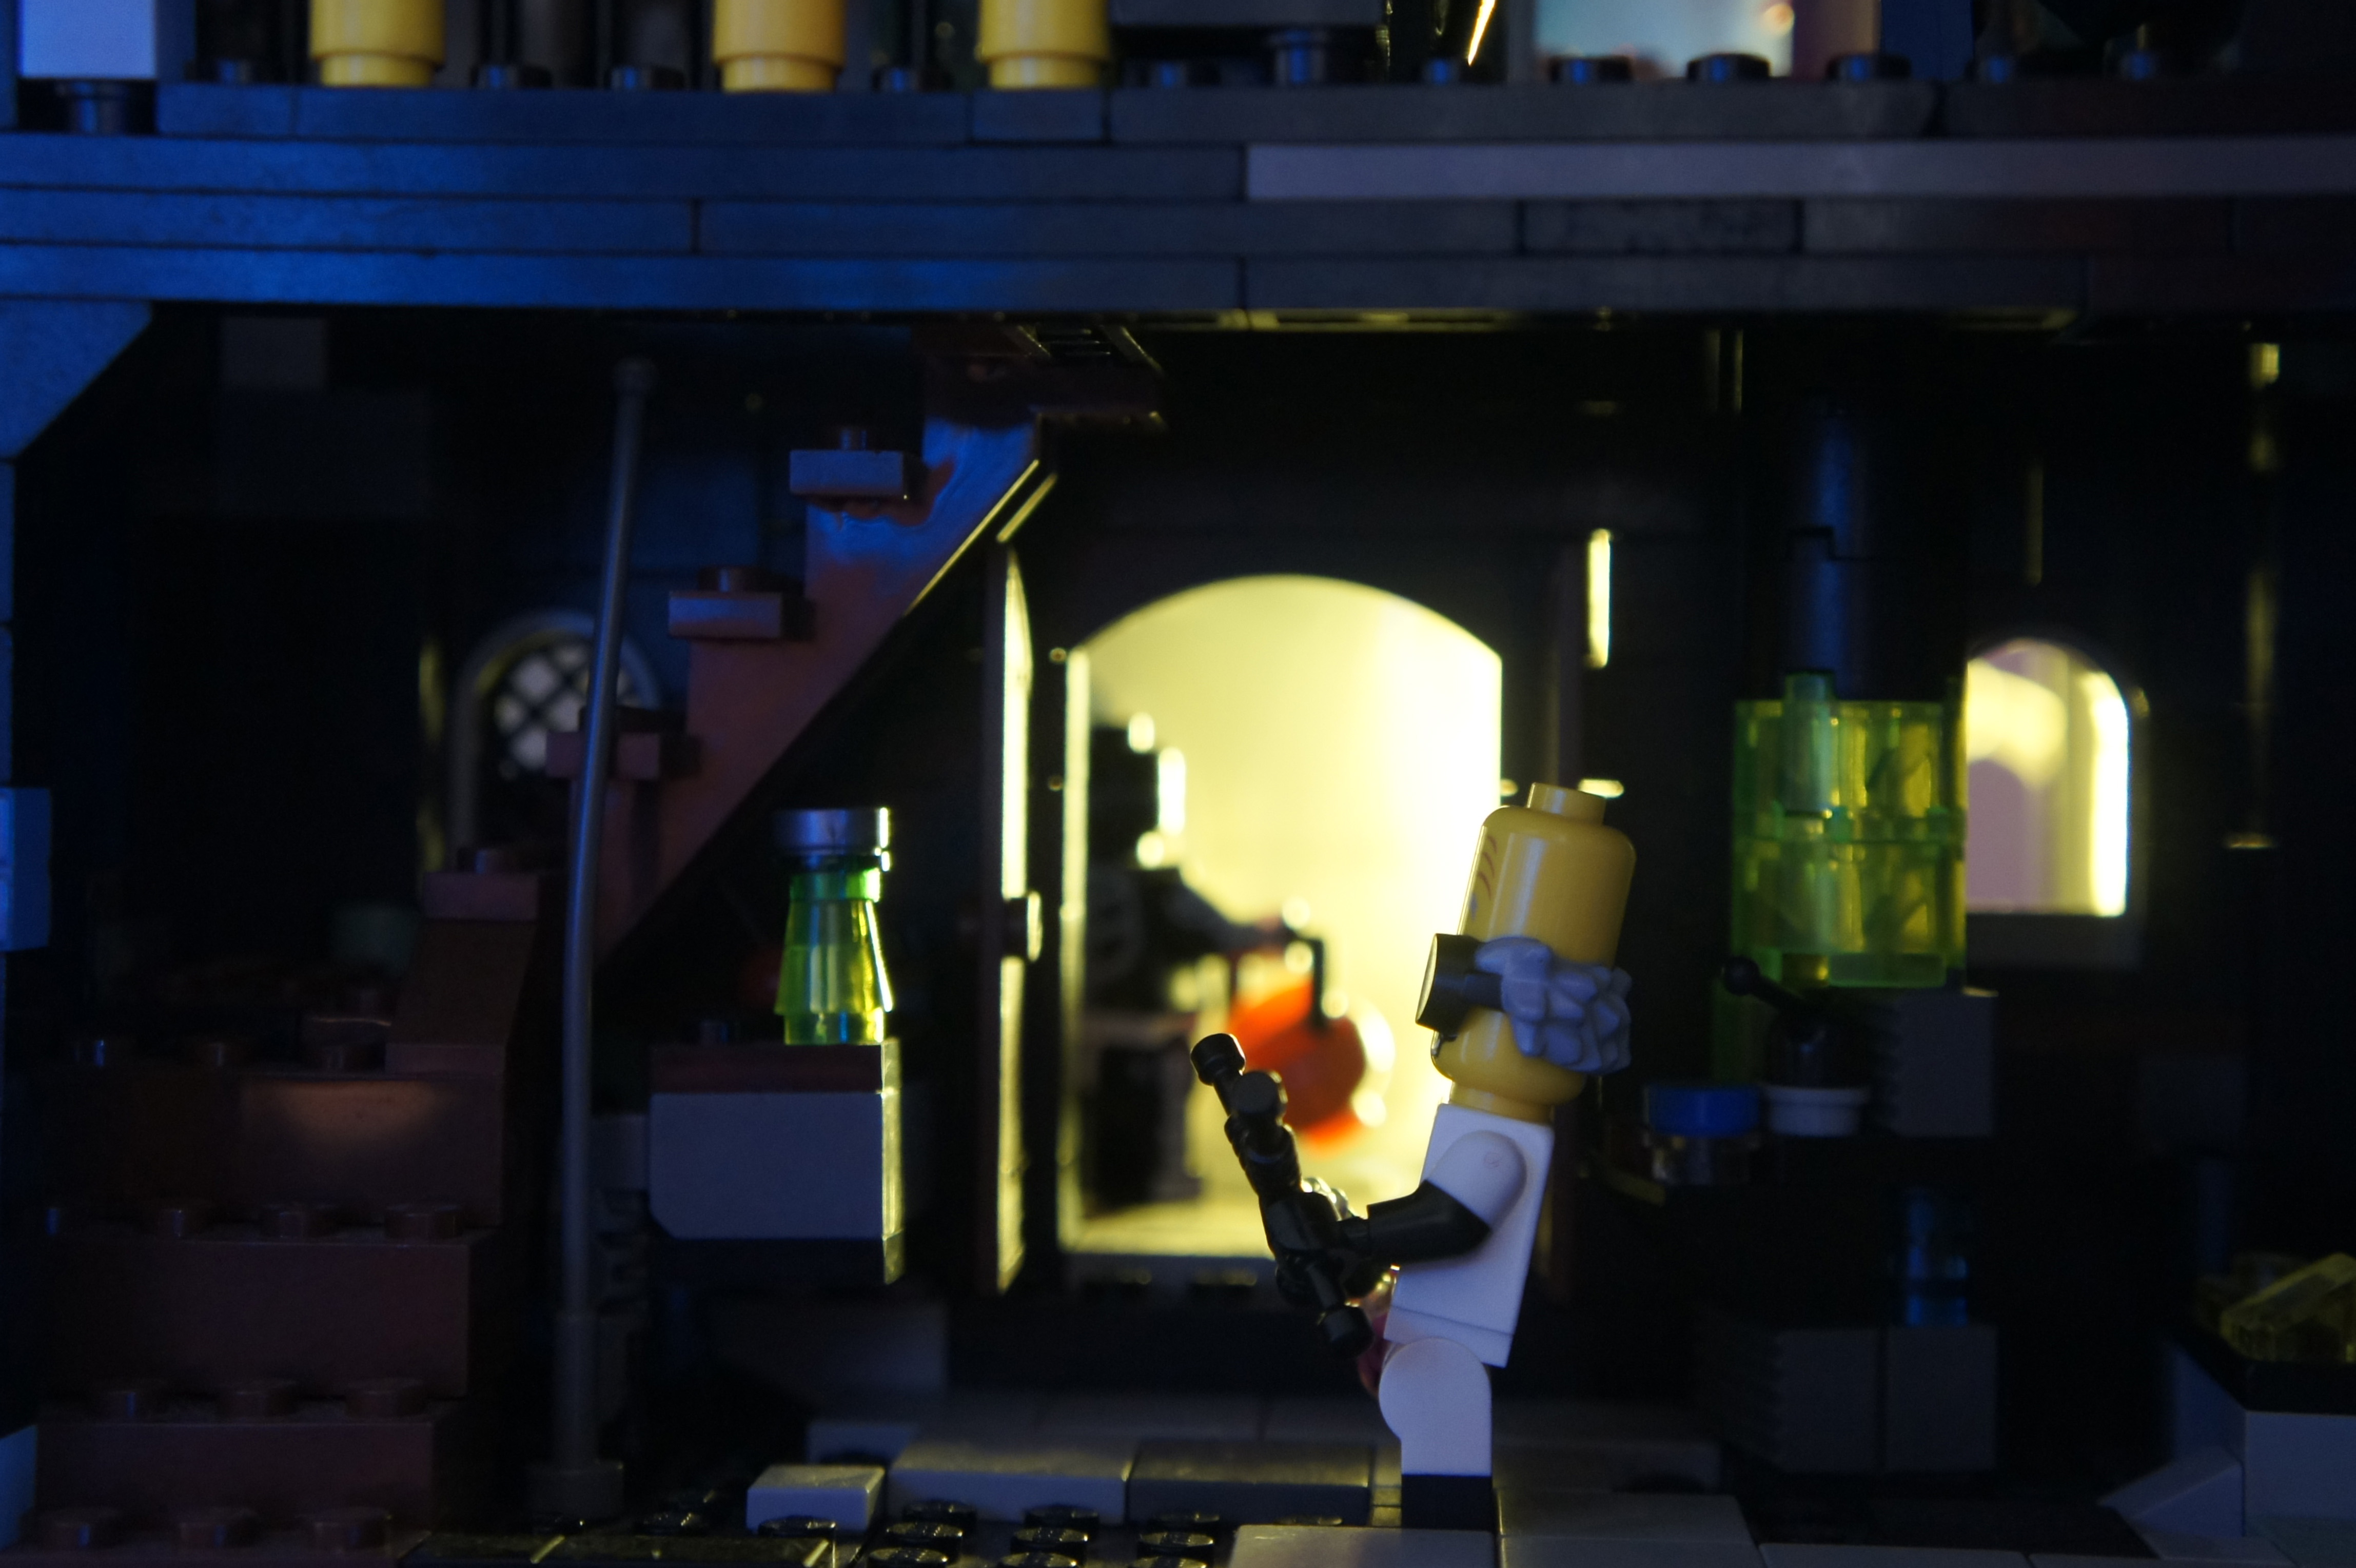 Custom Lego Haunted House (MOC) - Leftover Culture Review